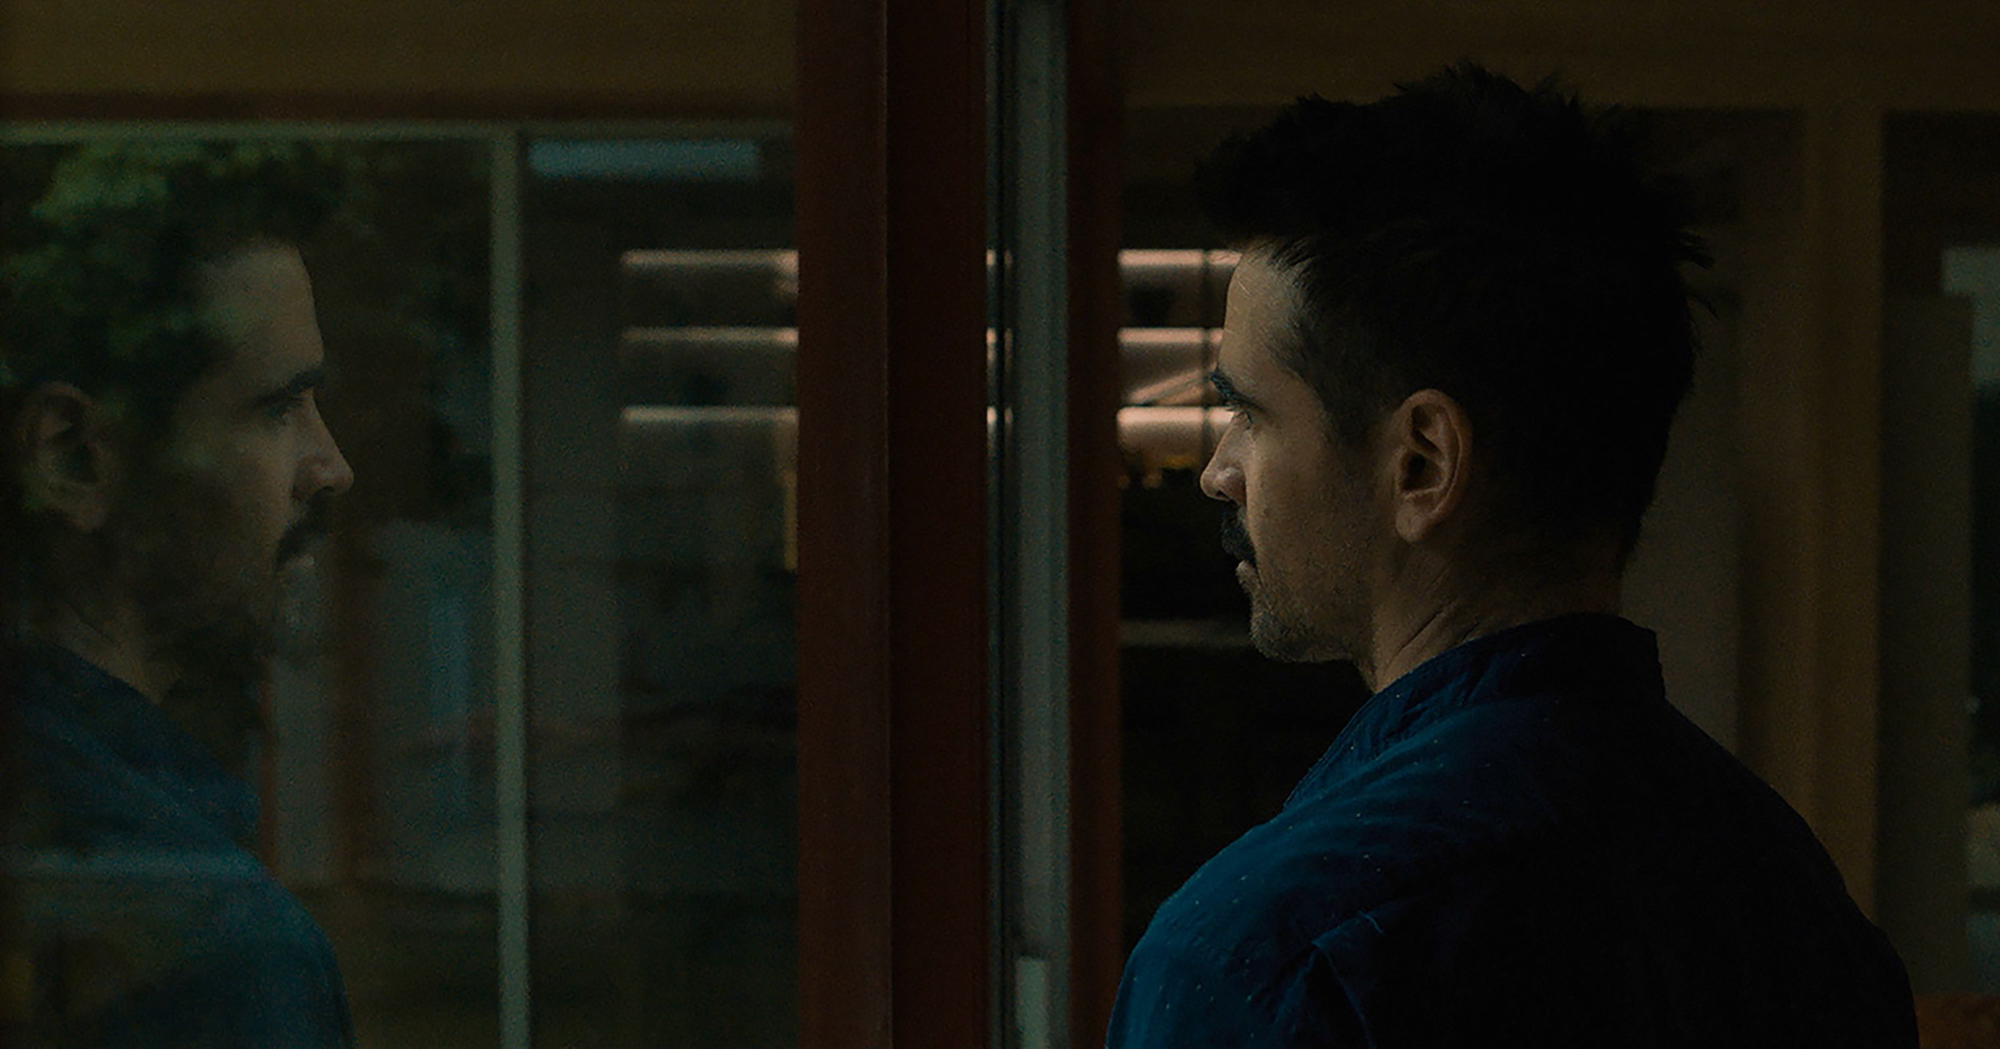 'After Yang' Colin Farrell as Jake looking out the window